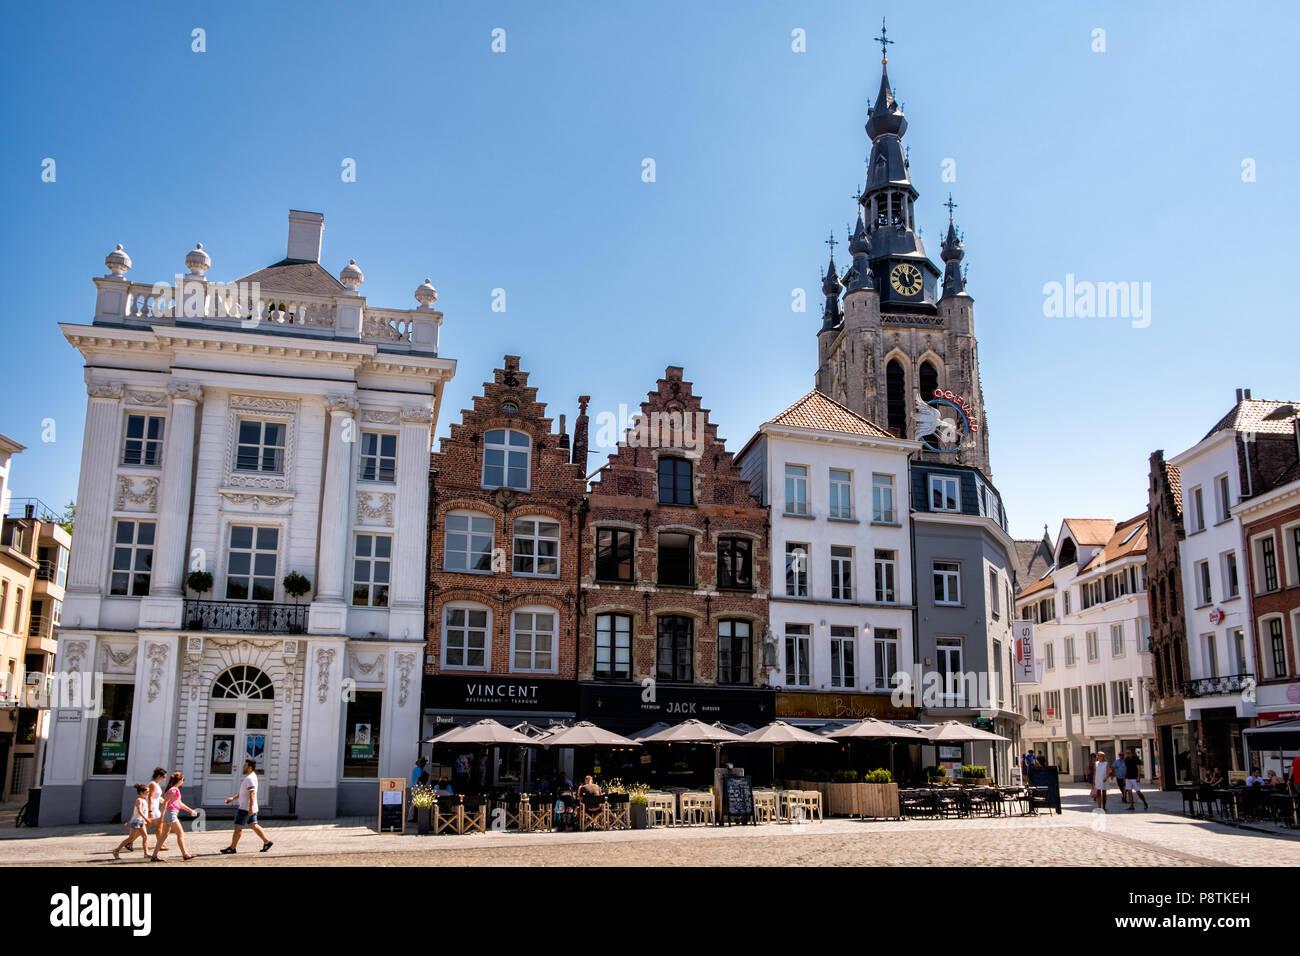 Kortrijk, Flanders, Belgium - JULY 1, 2018 : Some stepped gables at the Grote Markt square in the city center of Kortrijk, the St. Martin's church in  Stock Photo